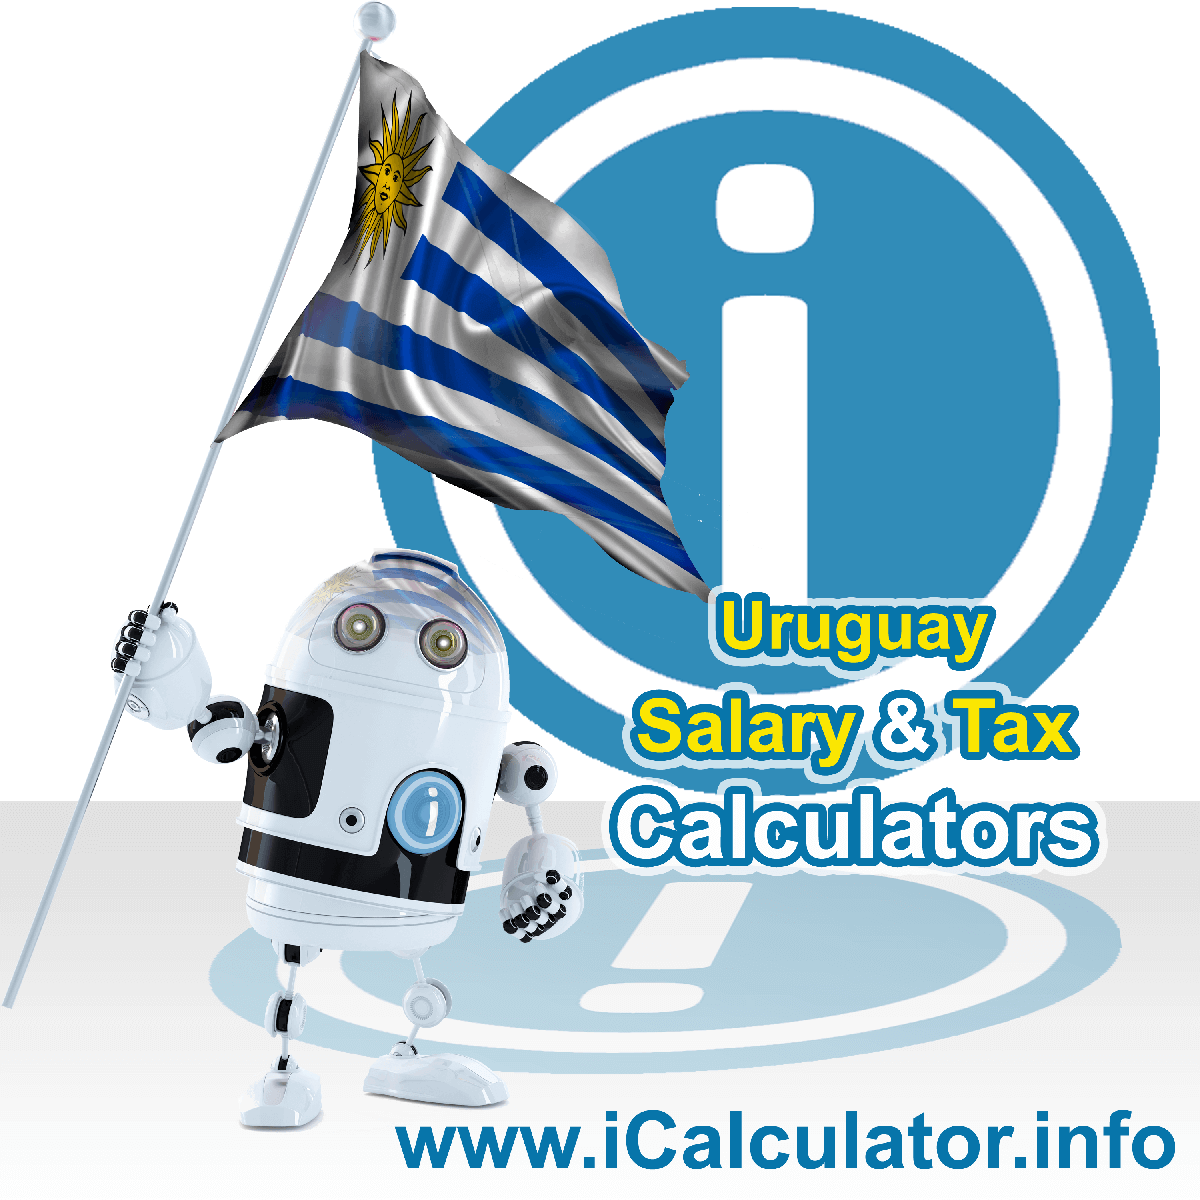 Uruguay Tax Calculator. This image shows the Uruguay flag and information relating to the tax formula for the Uruguay Salary Calculator